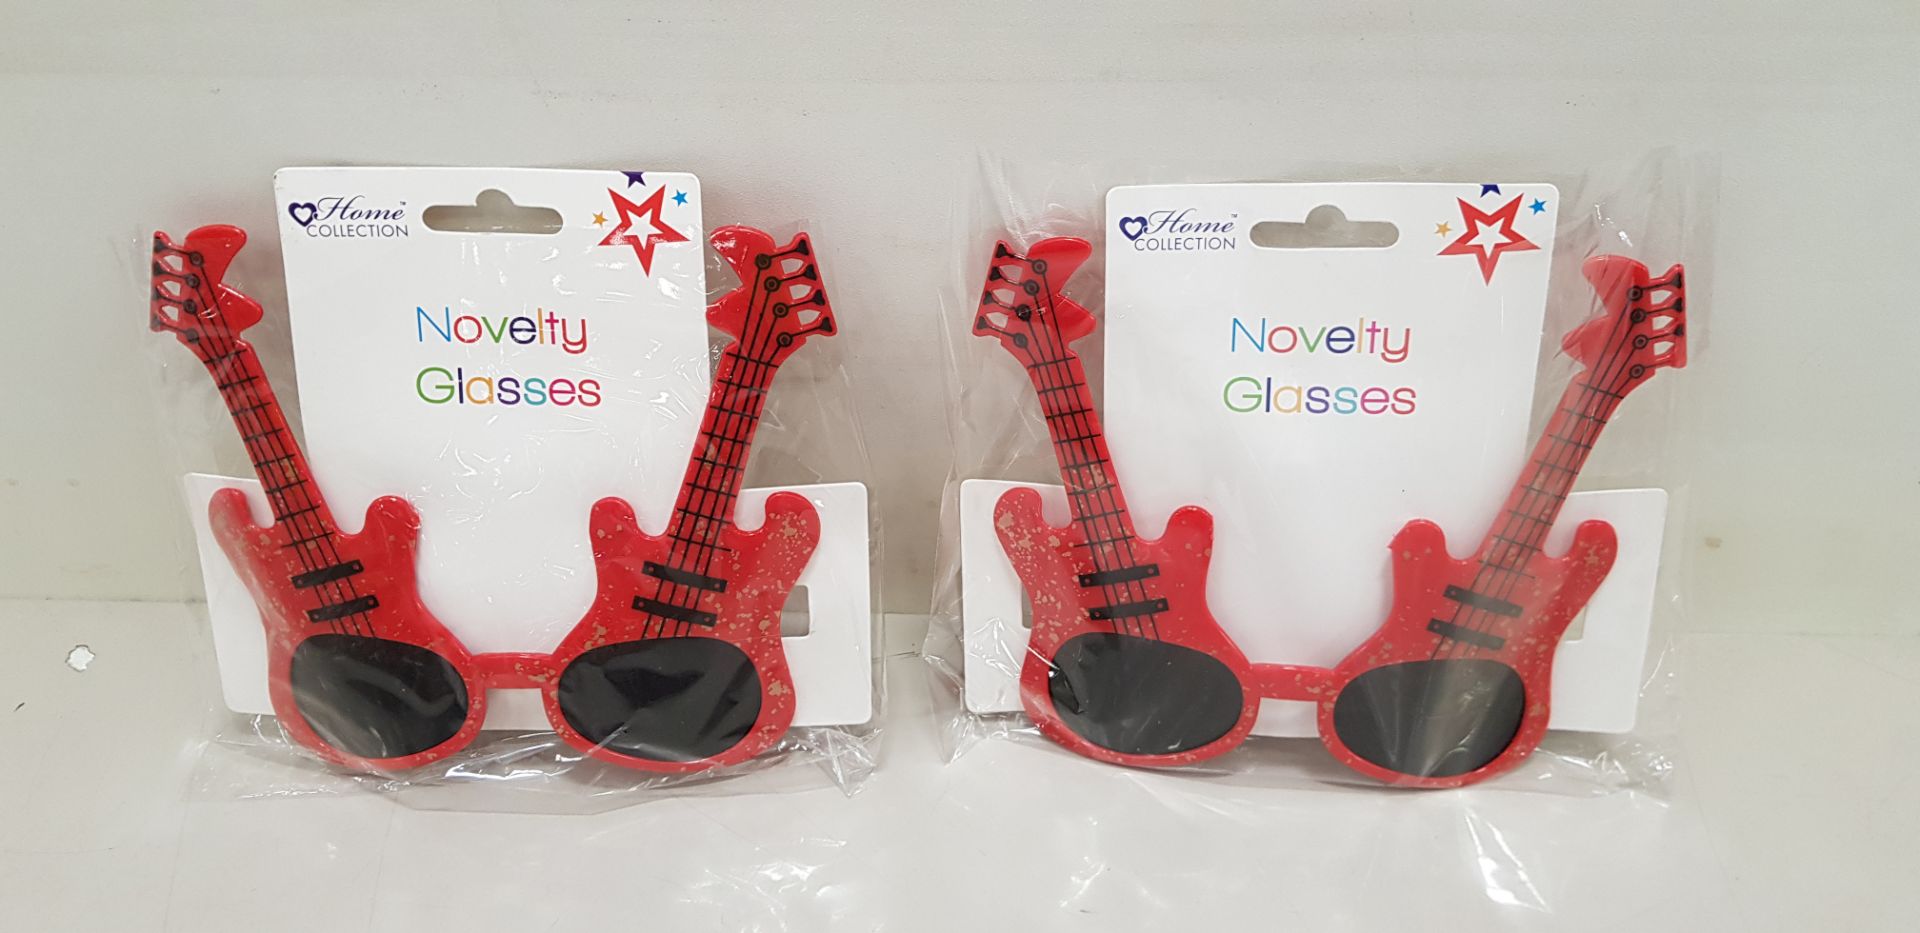 1440 X BRAND NEW HOME COLLECTION NOVELTY GUITAR GLASSES IN RED - IN 30 BOXES